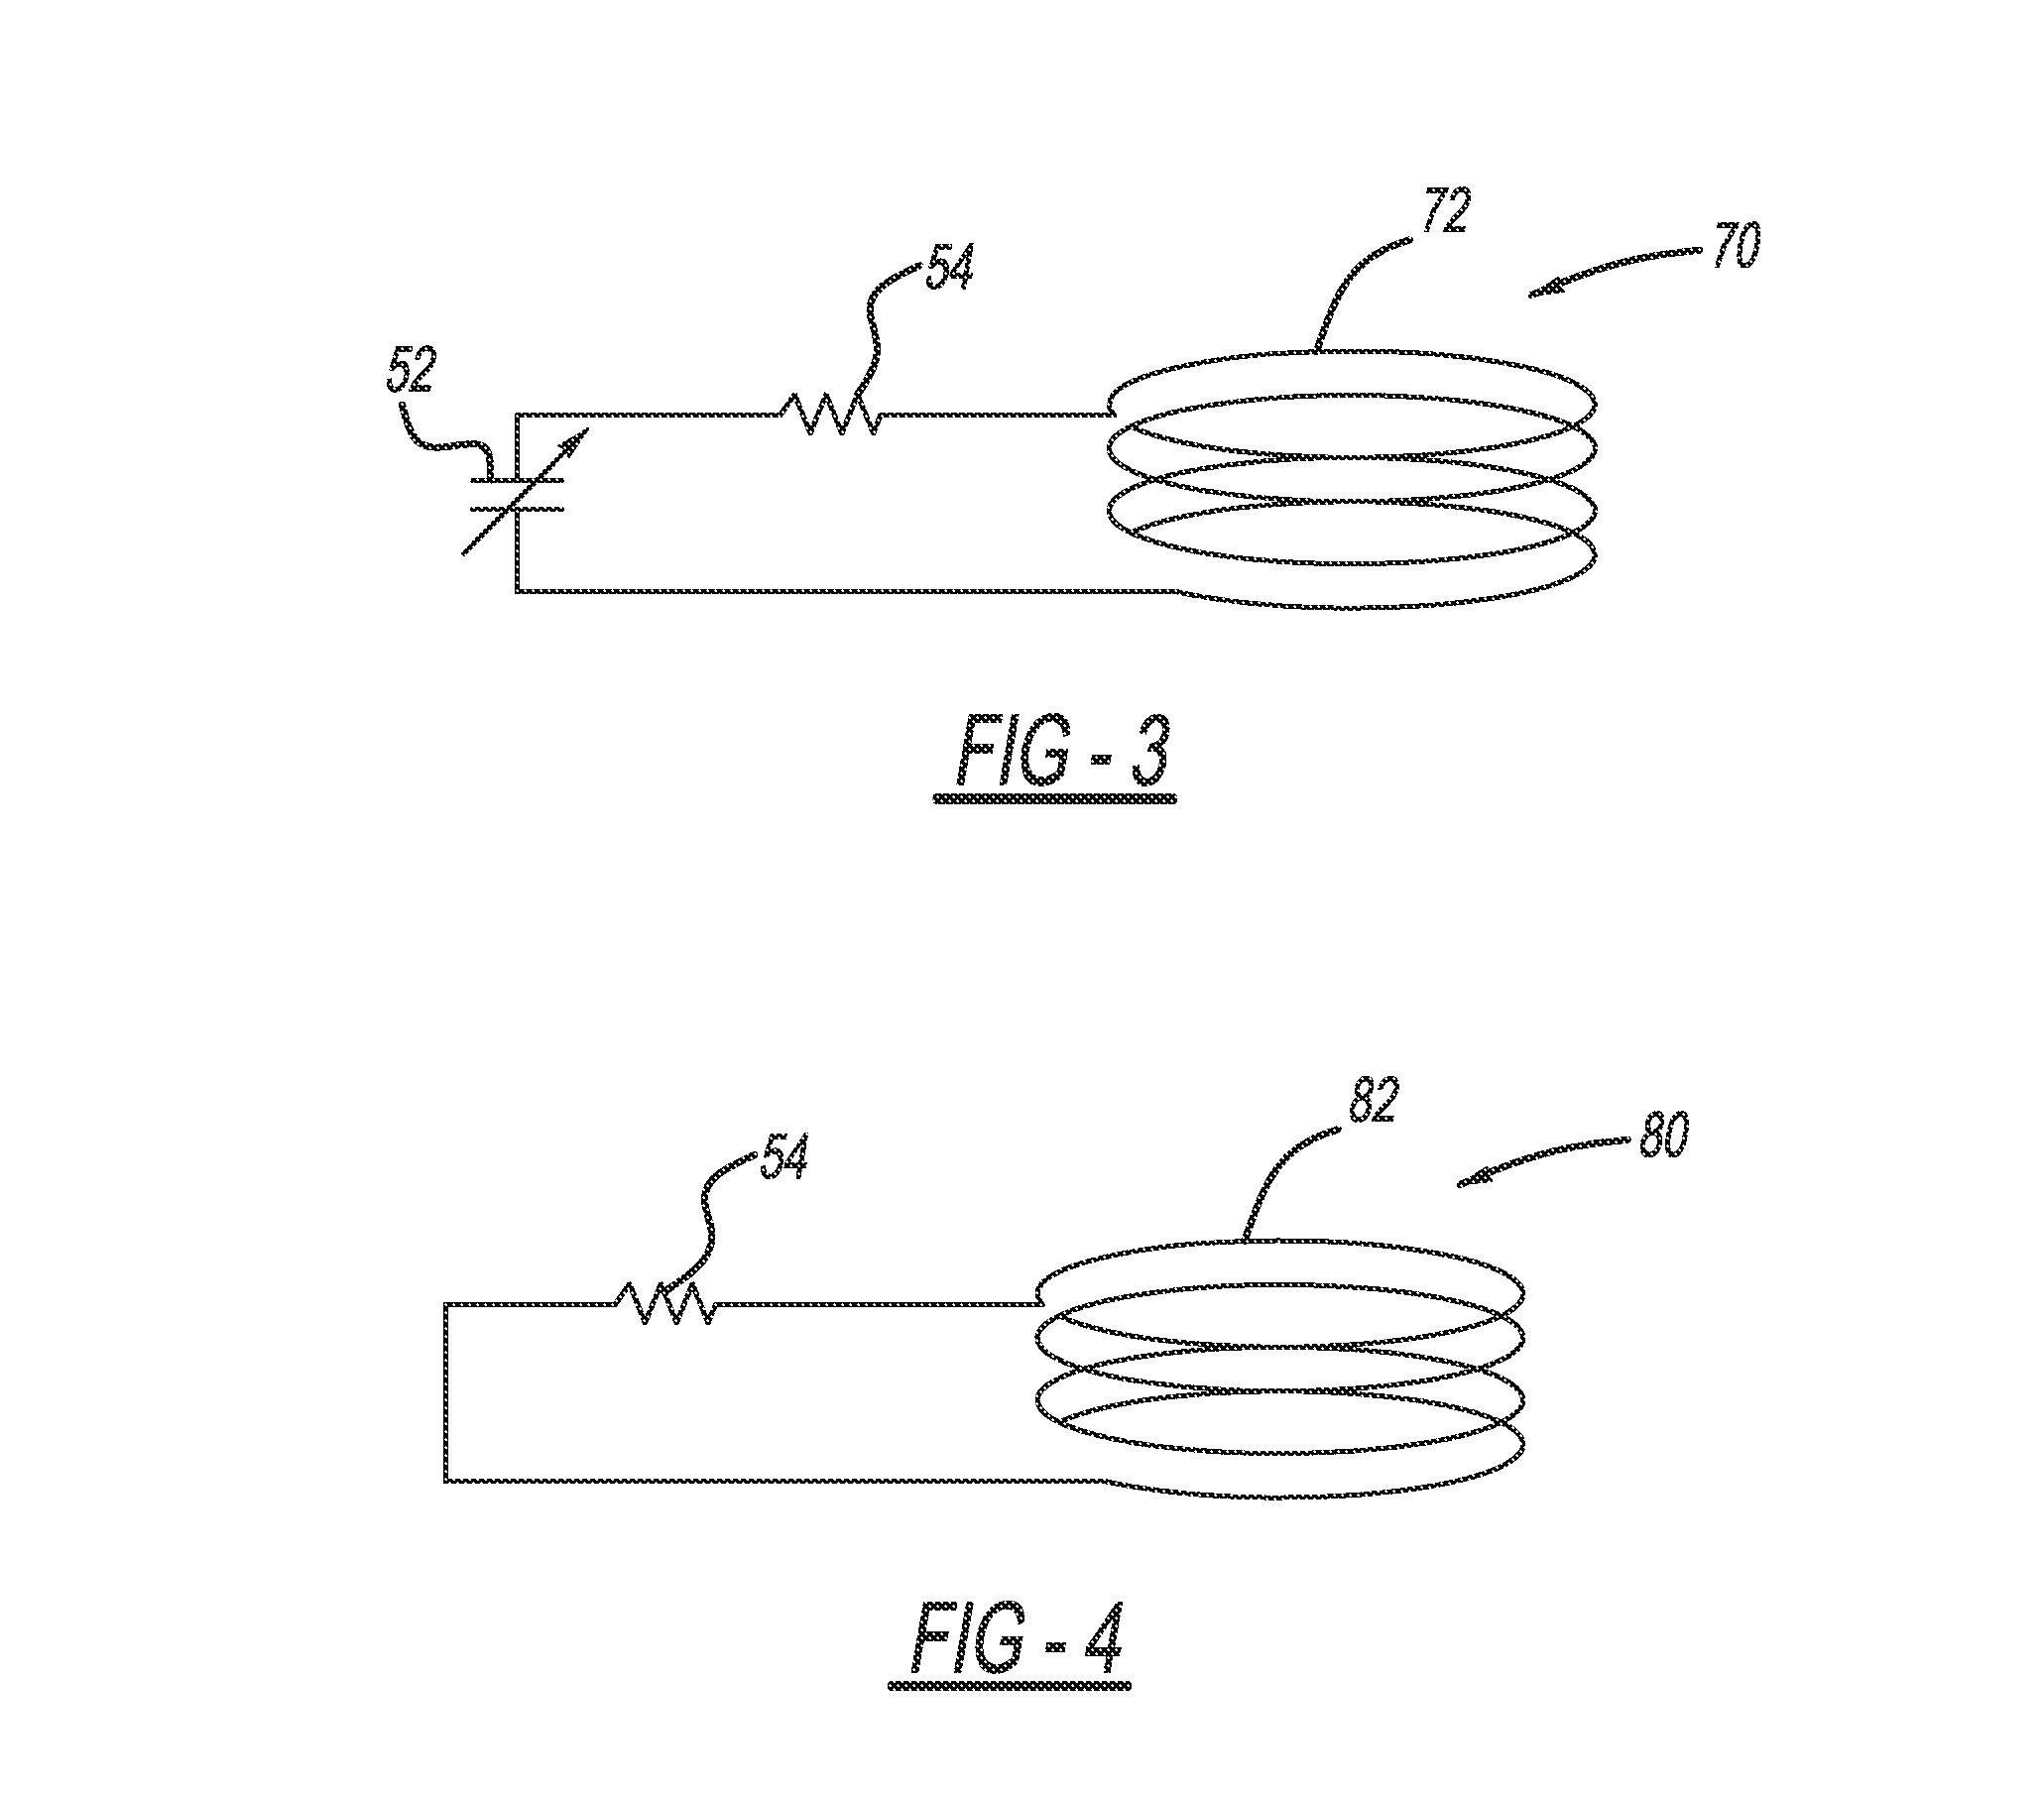 Apparatus for cost effective wireless actuator using sma and mrc